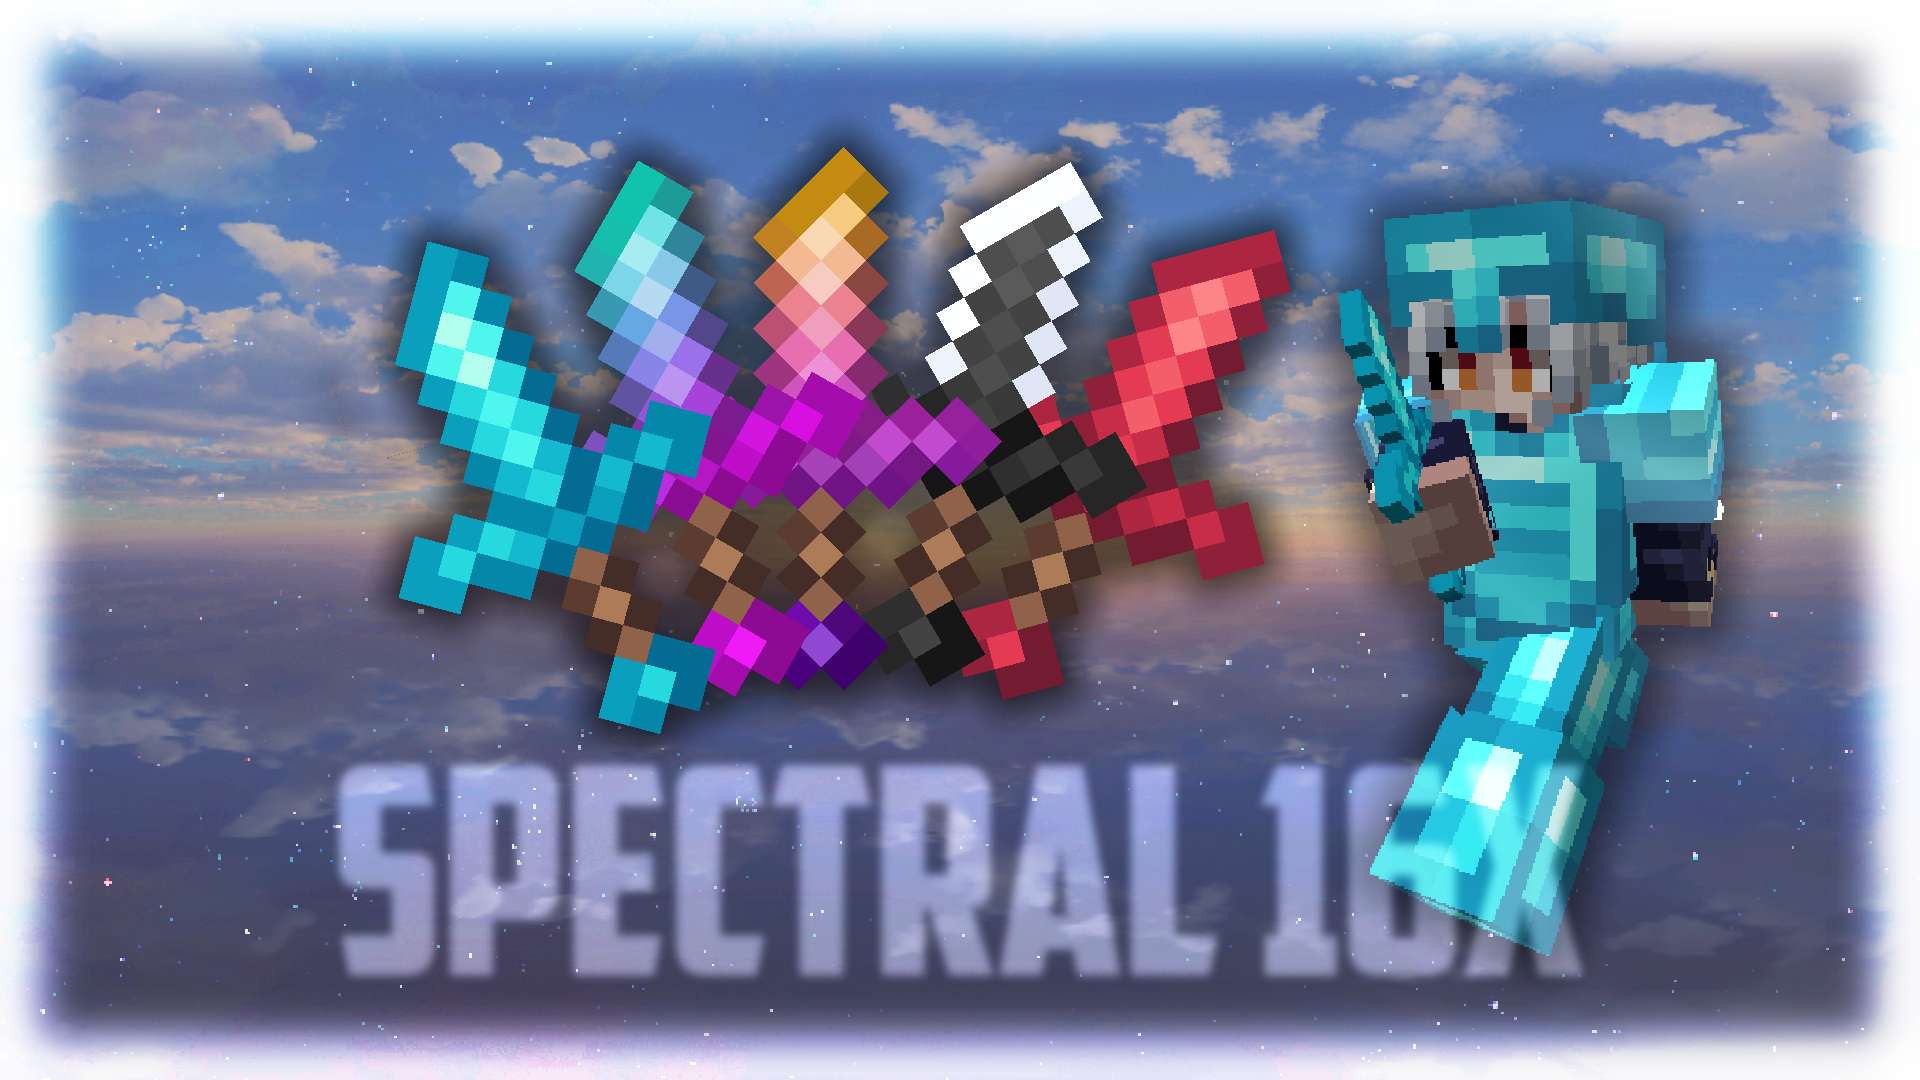 Spectral - Ice 16 by Zlax on PvPRP